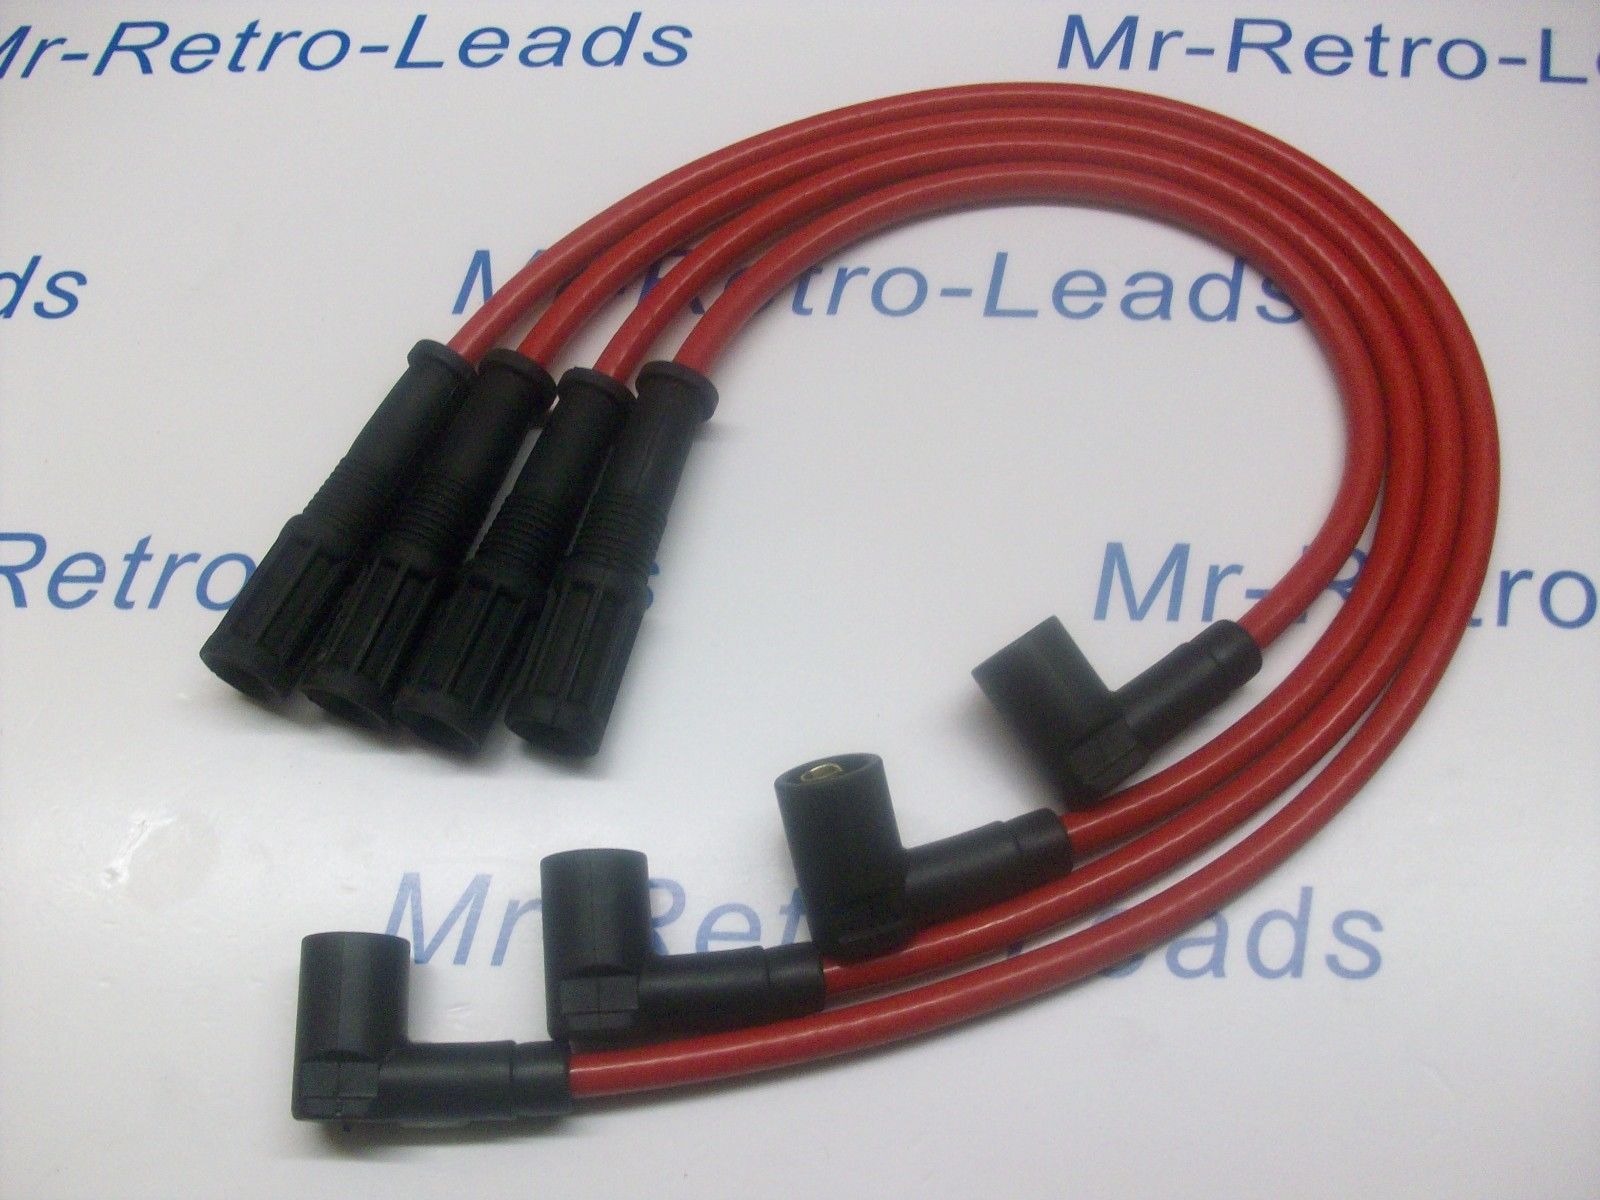 Red 8mm Performance Ignition Leads Fiat Cinquecento Seicento 1.1 Sporting Ht..